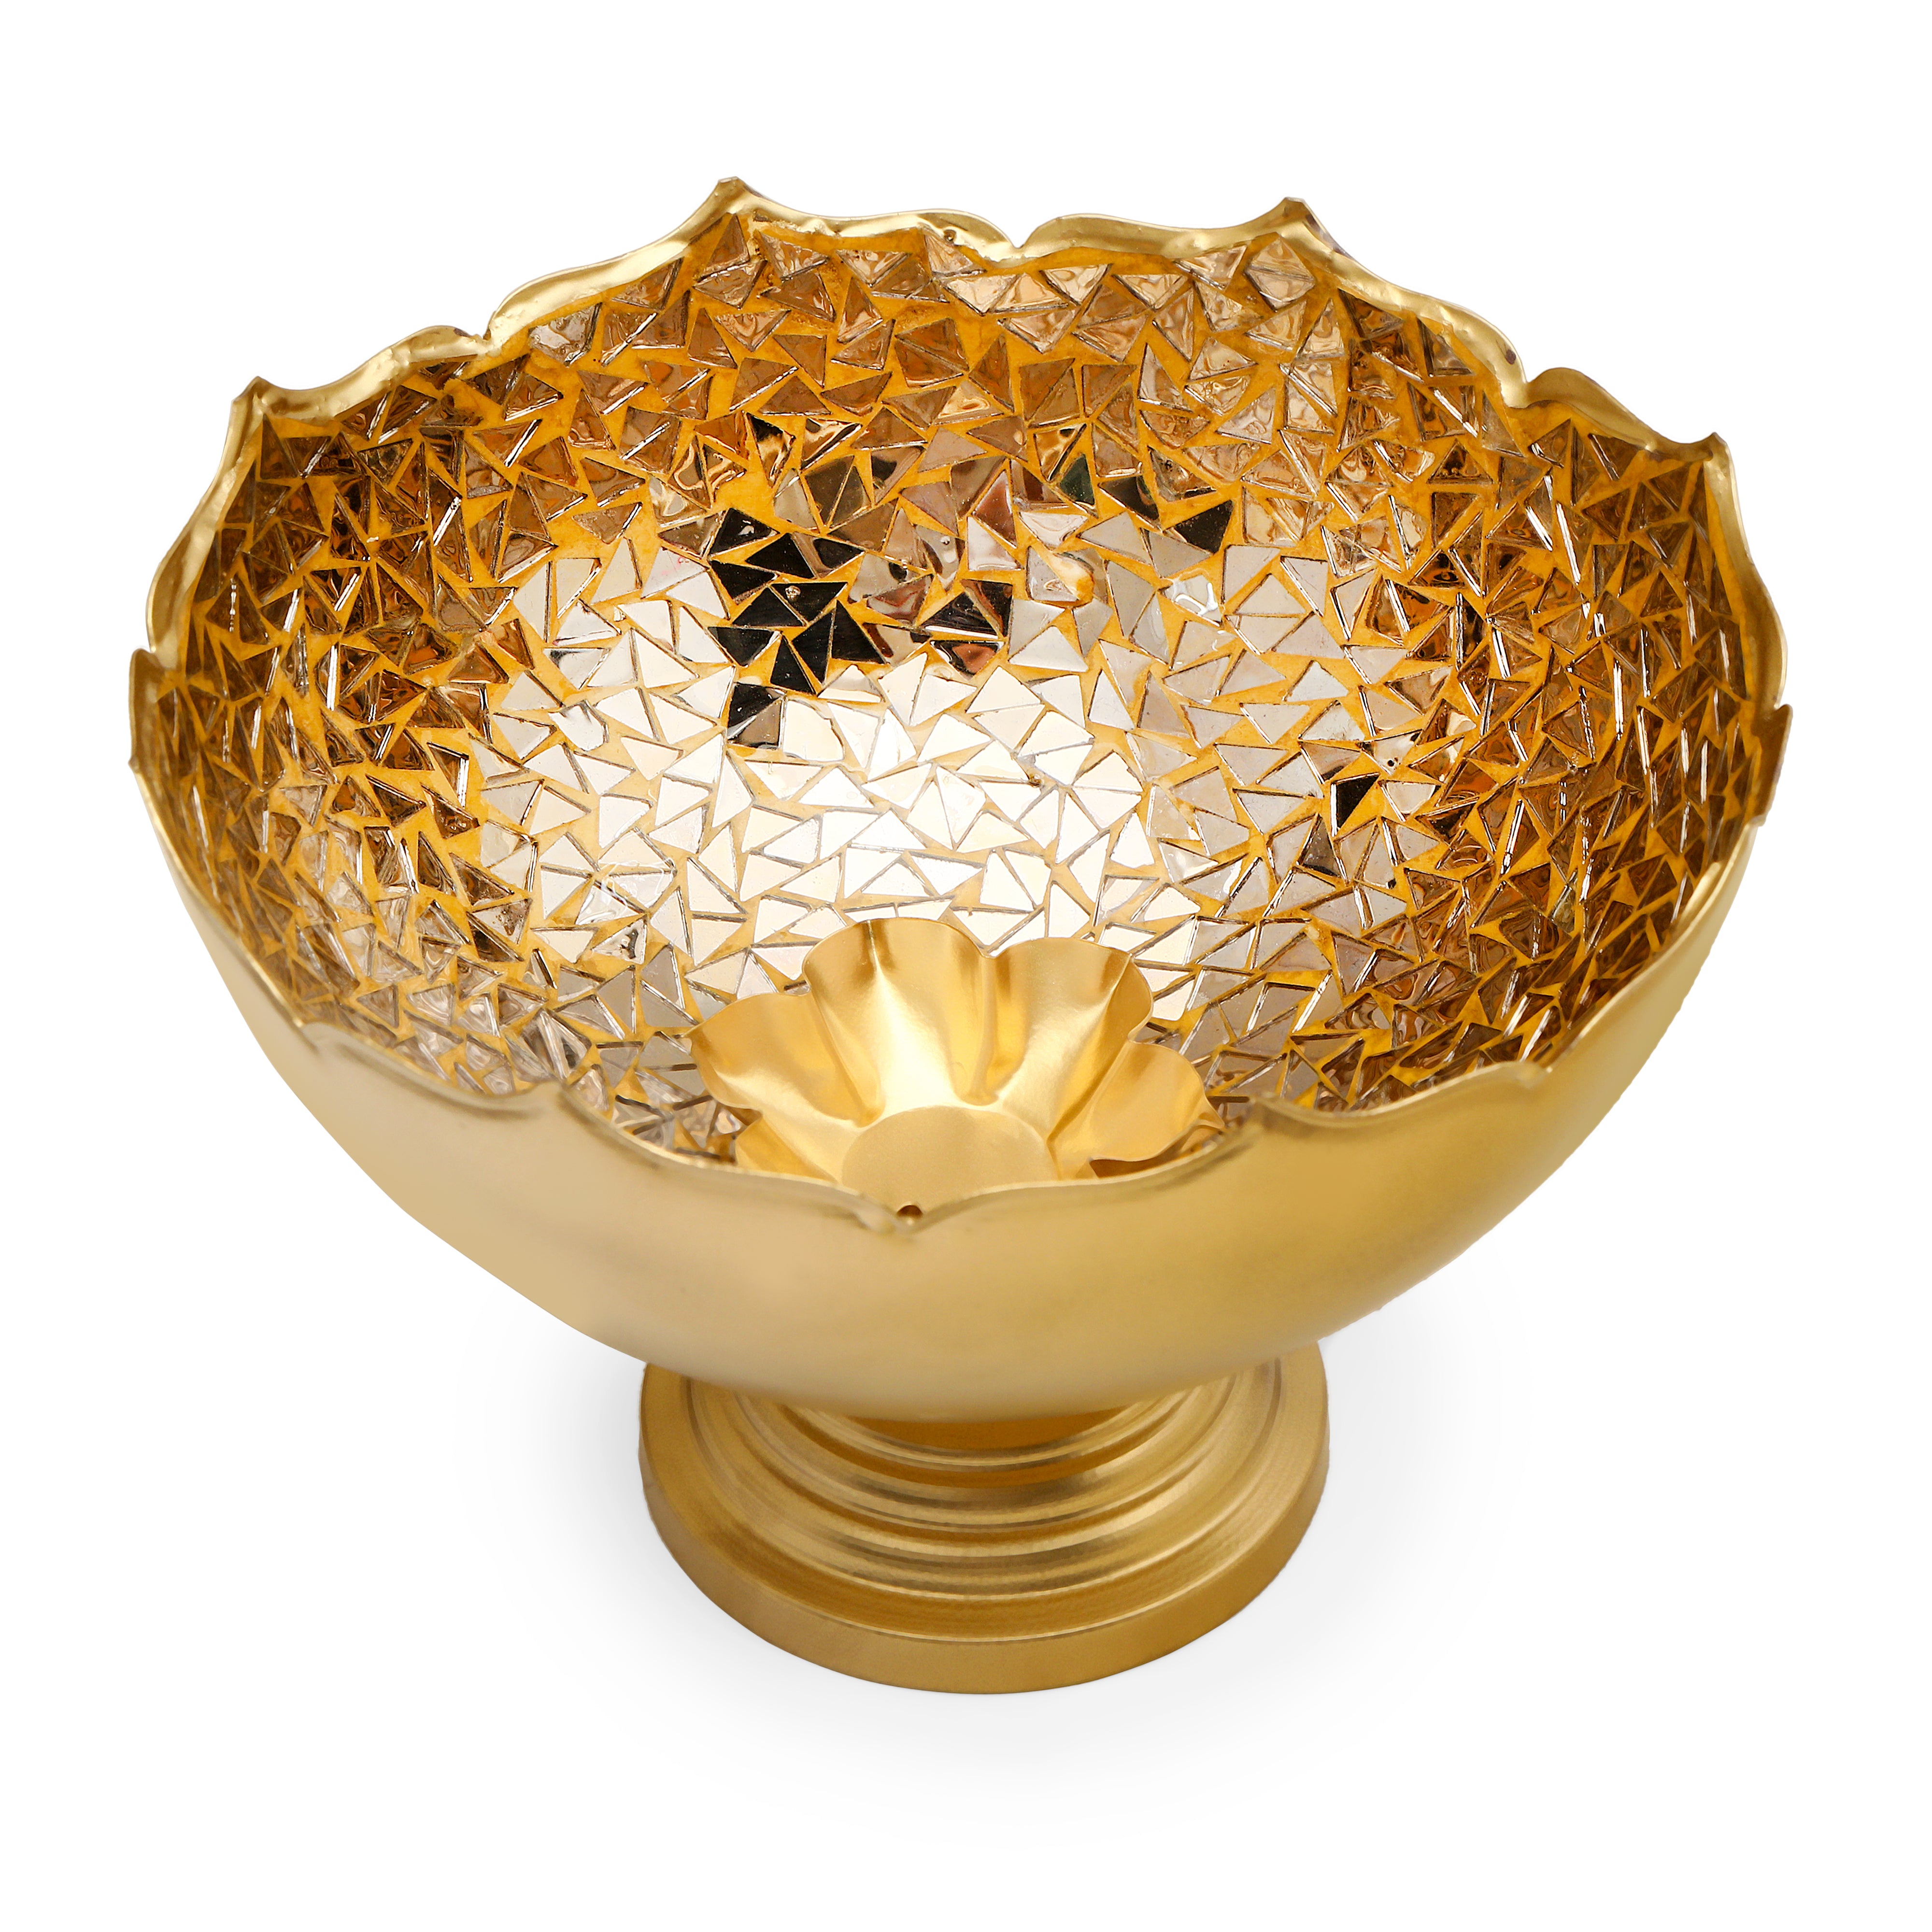 Gold Mosaic Urli with Stand 10.5" Inch (Medium) 2- The Home Co.